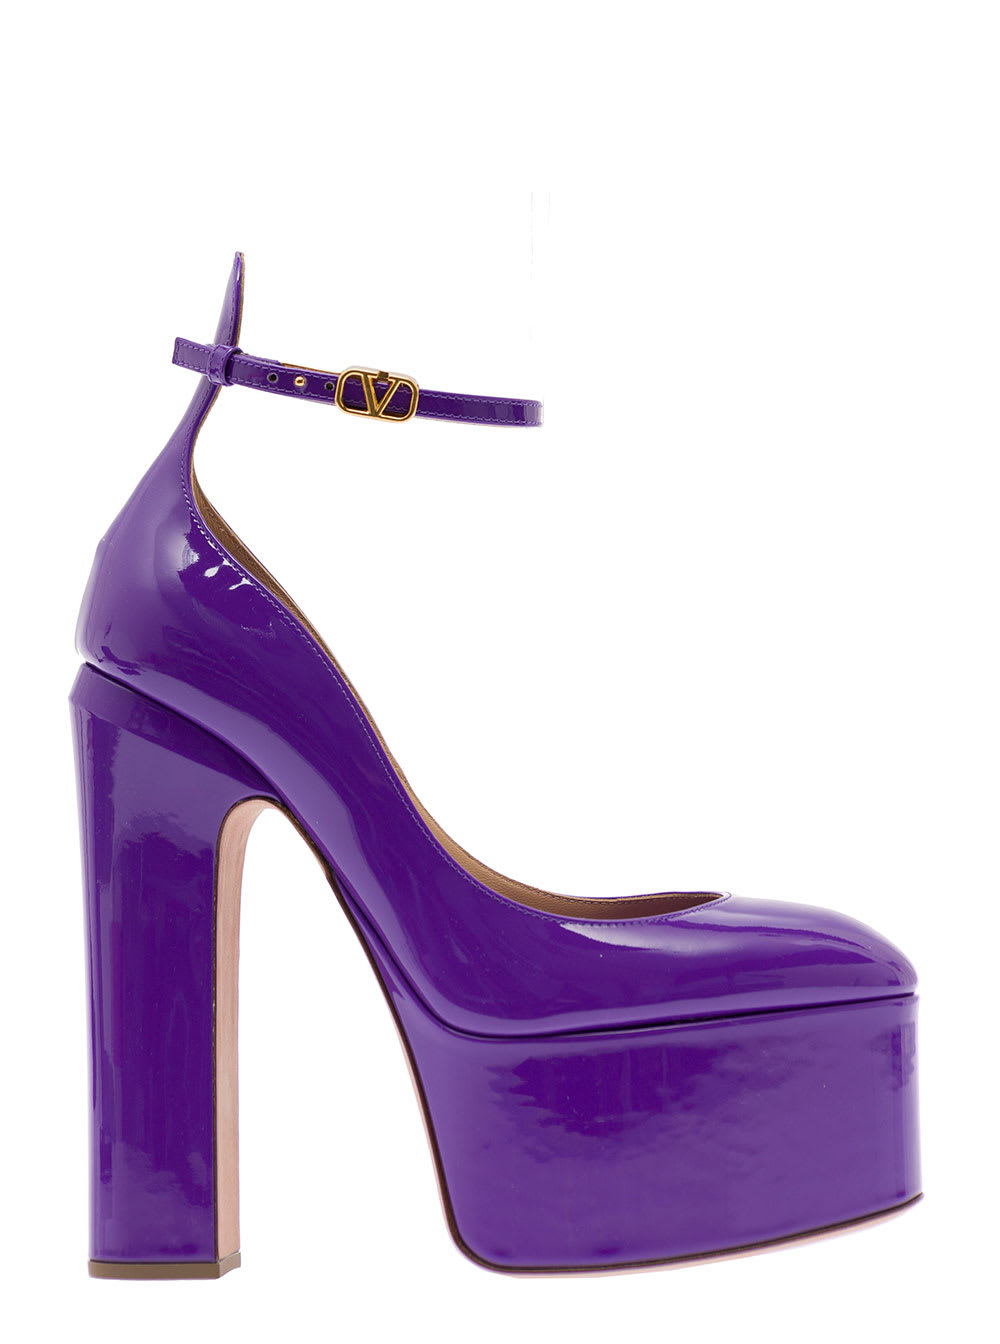 tan-go Purple Décolleté With Platform And Vlogo Buckle In Patent Leather Woman